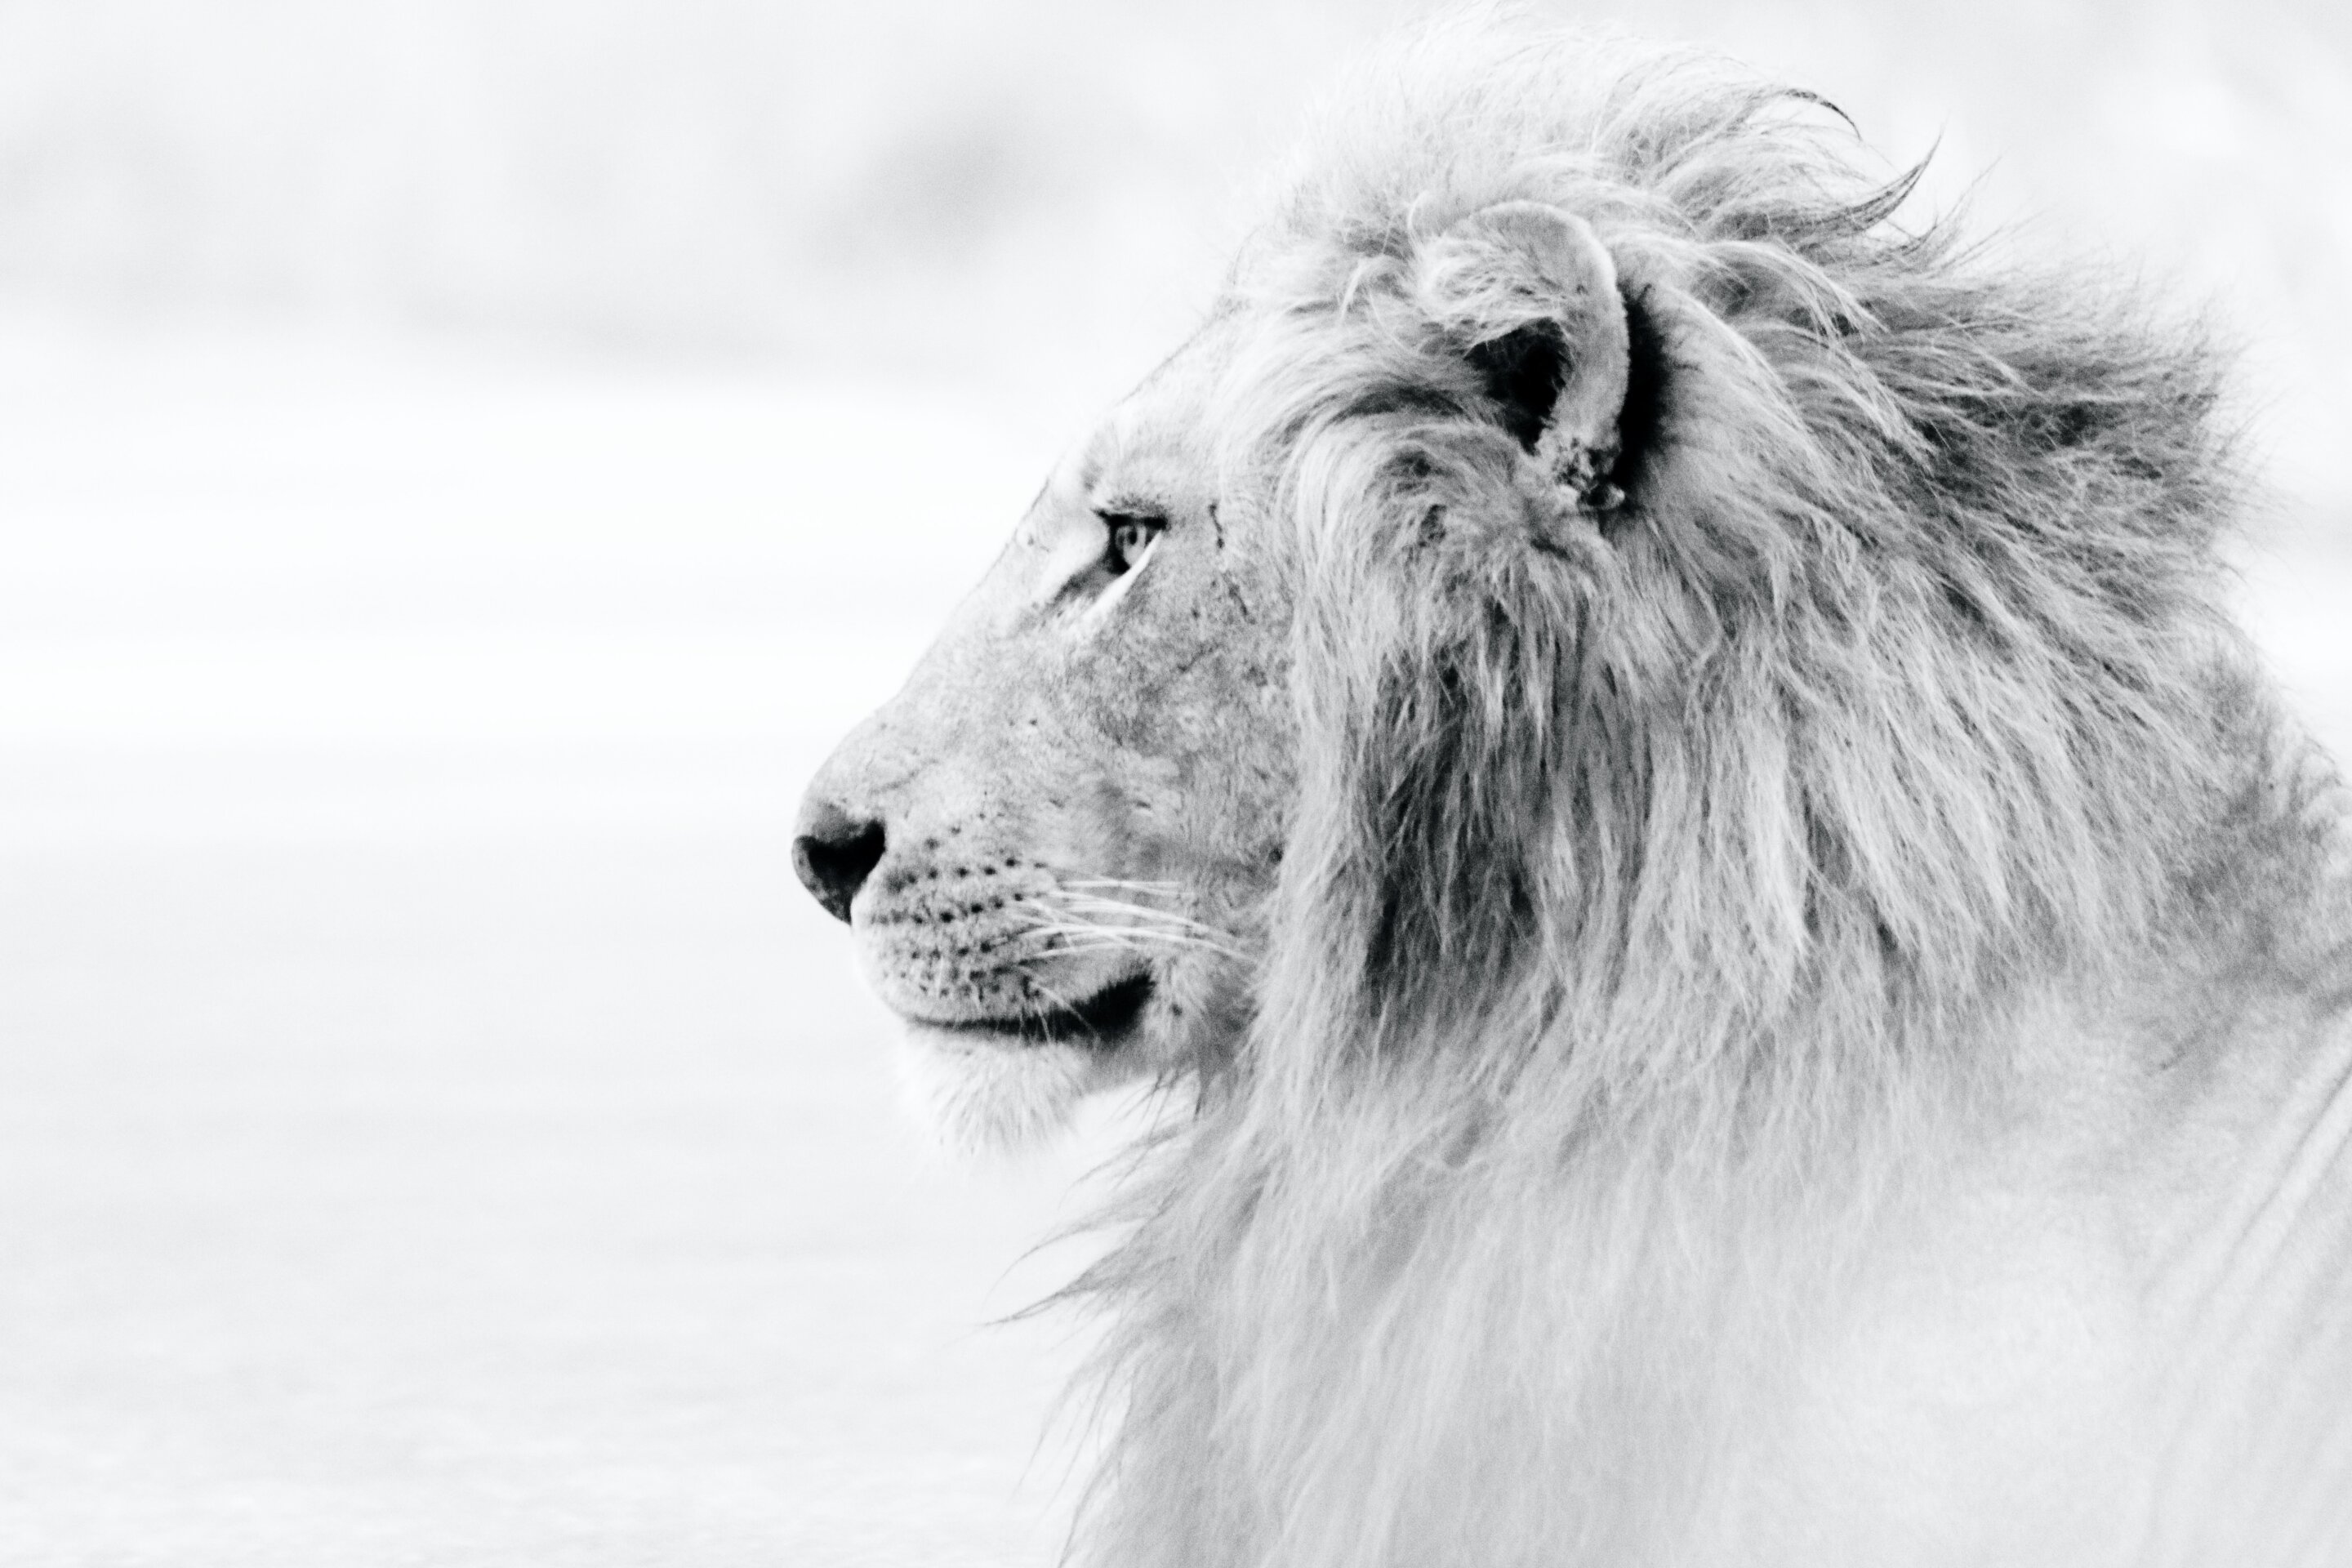 Lion evolution according to genome sequencing - Africa Geographic